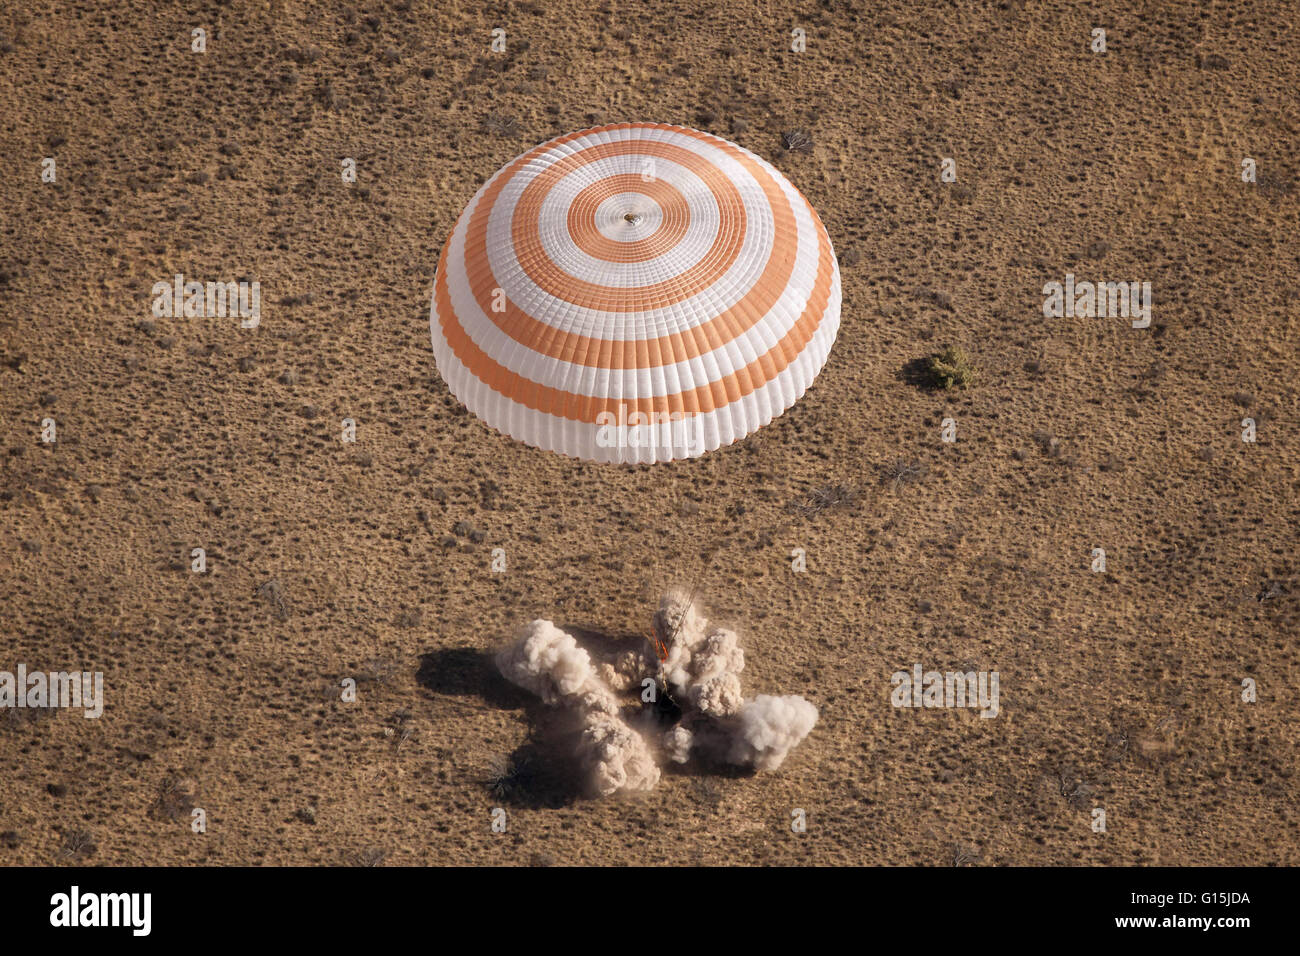 The Soyuz TMA-21 spacecraft lands in a remote area outside of the town of Zhezkazgan, Kazakhstan, on Friday, September 16, 2011. Stock Photo